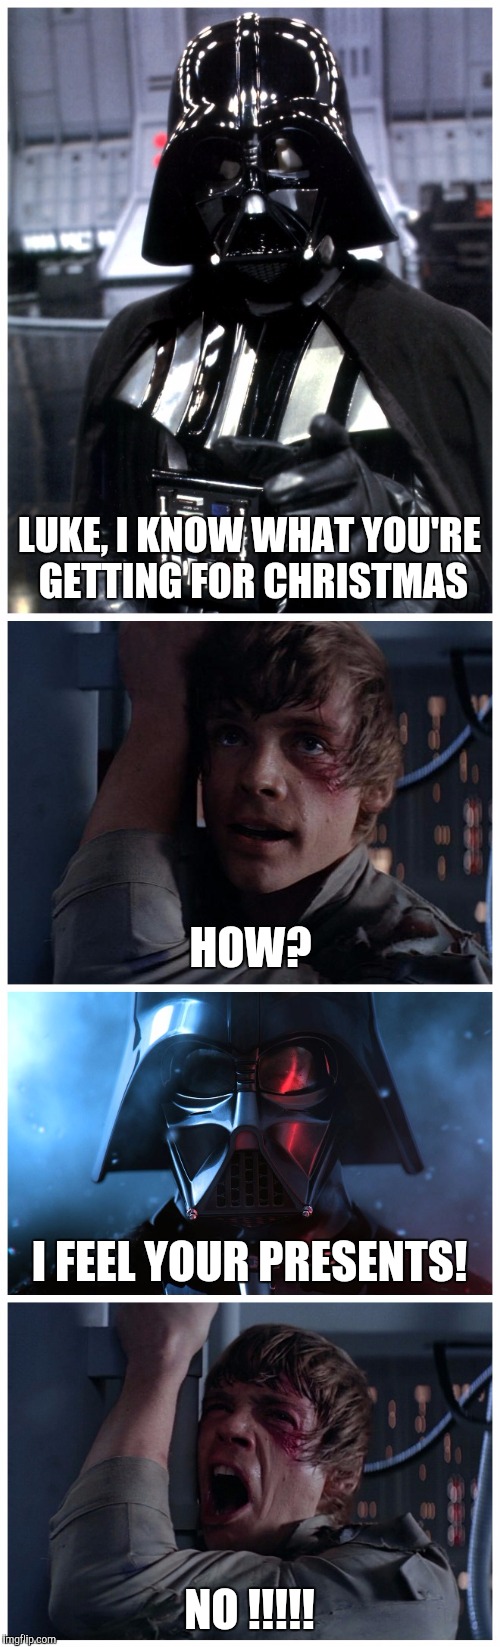 I Feel Your Presents | LUKE, I KNOW WHAT YOU'RE GETTING FOR CHRISTMAS NO !!!!! HOW? I FEEL YOUR PRESENTS! | image tagged in star wars,darth vader,luke skywalker,luke skywalker and darth vader,christmas,bad pun | made w/ Imgflip meme maker